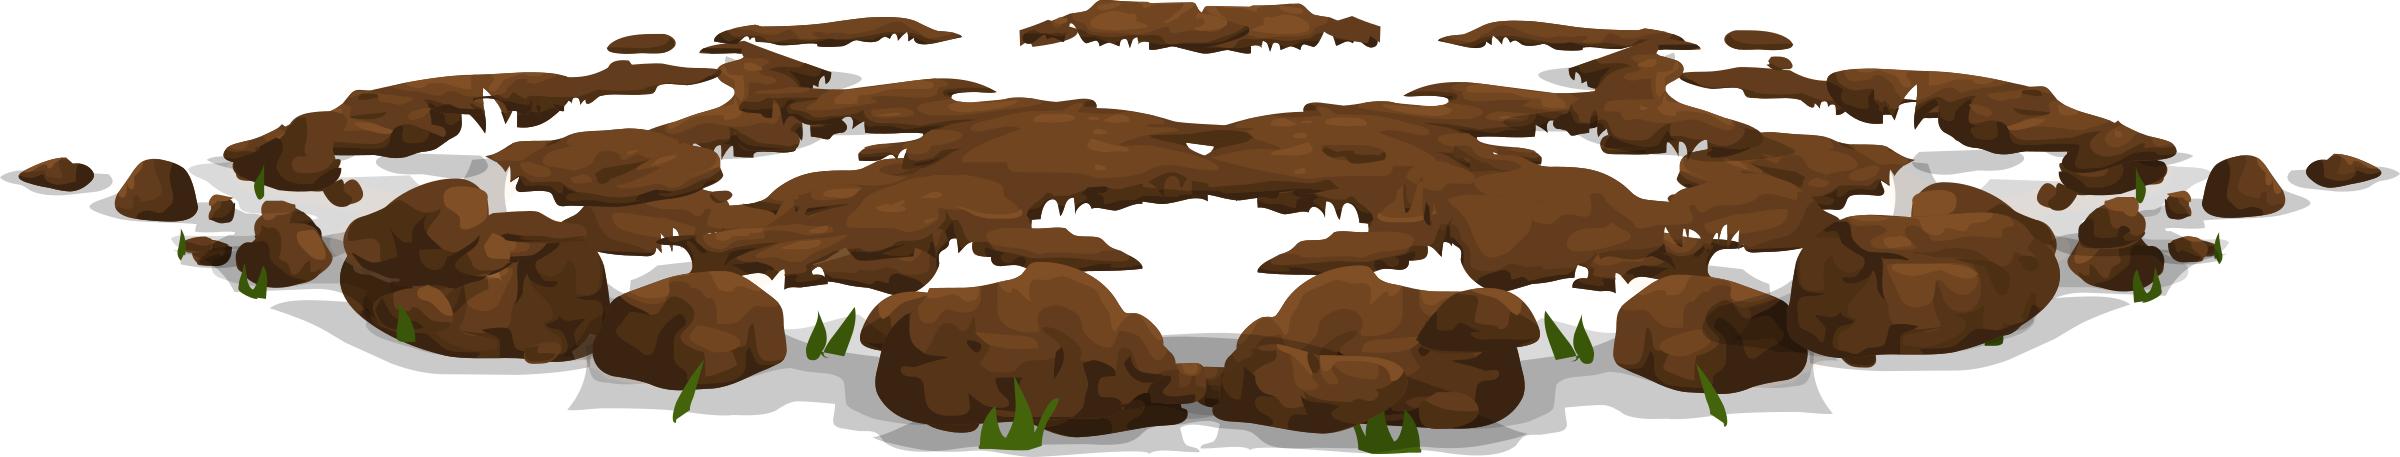 Harvestable Resources Dirt Pile PNG icons